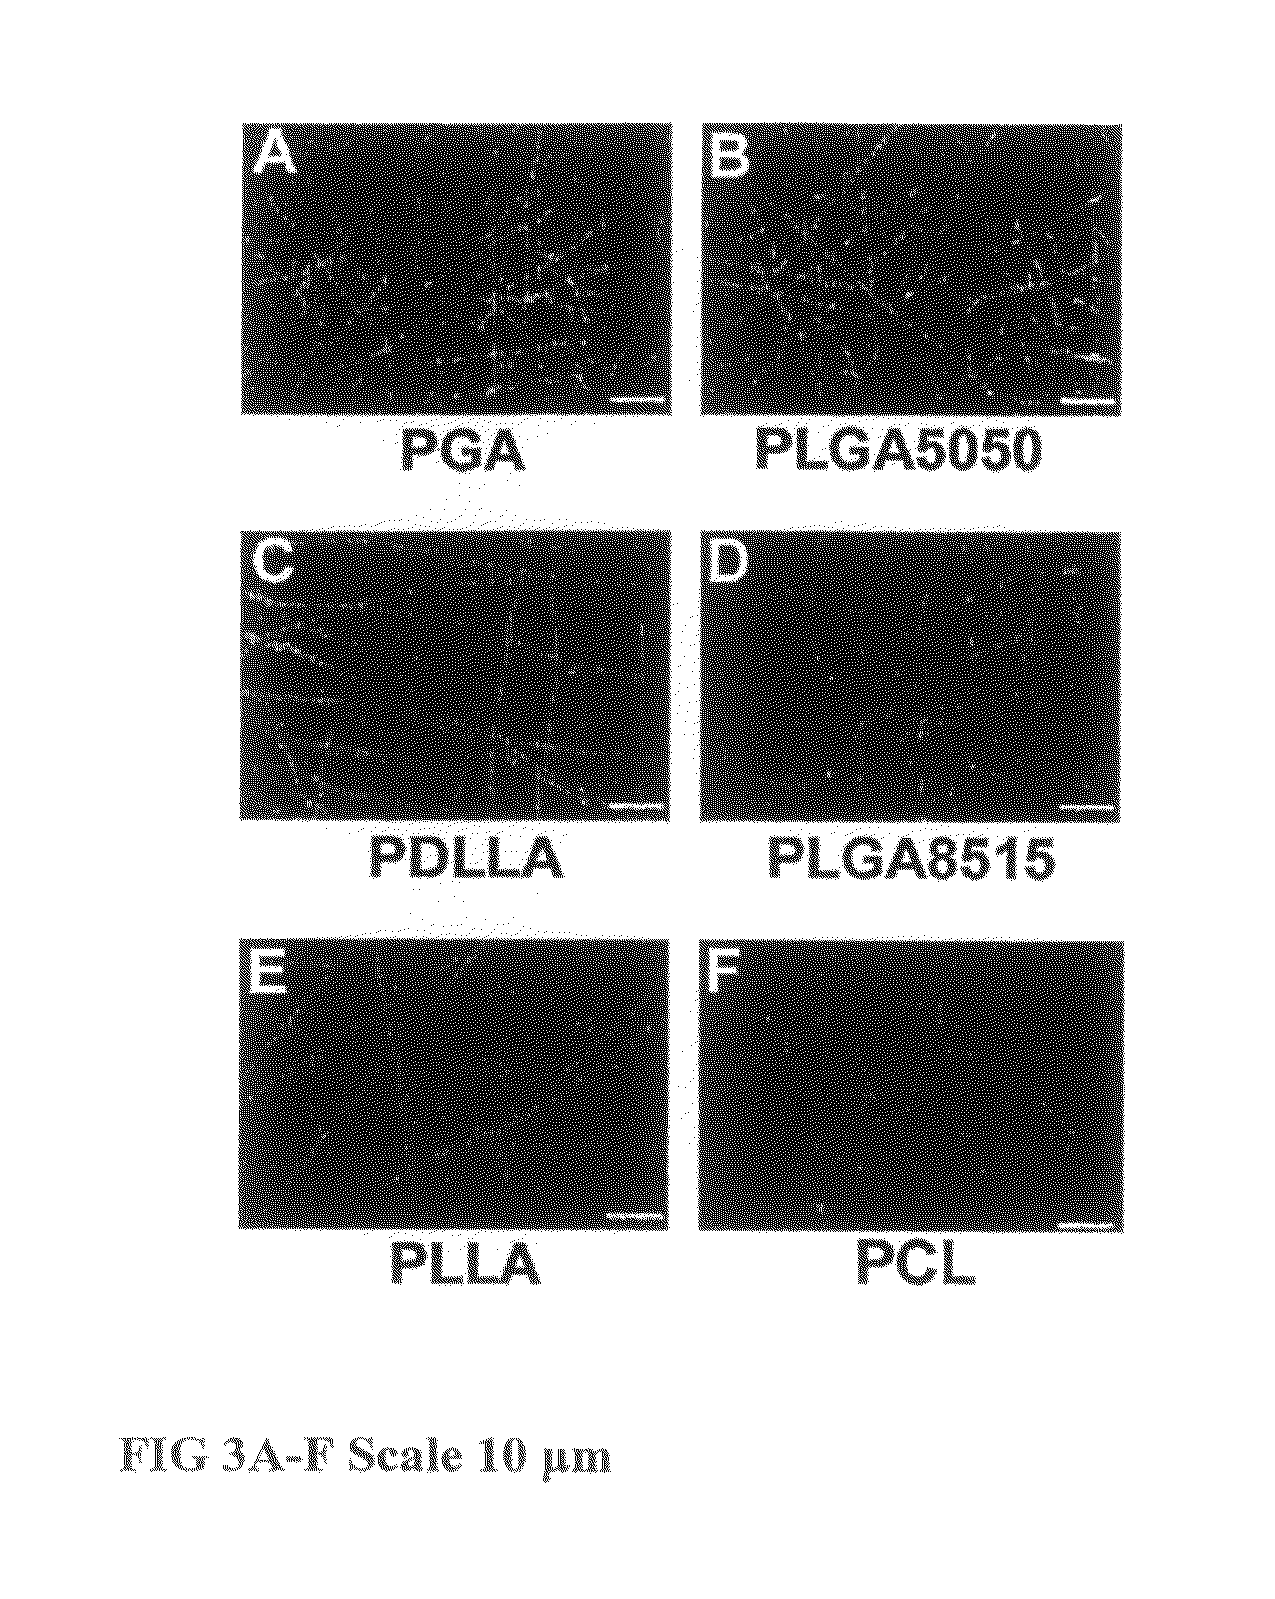 Tissue engineered cartilage, method of making same, therapeutic and cosmetic surgical applications using same